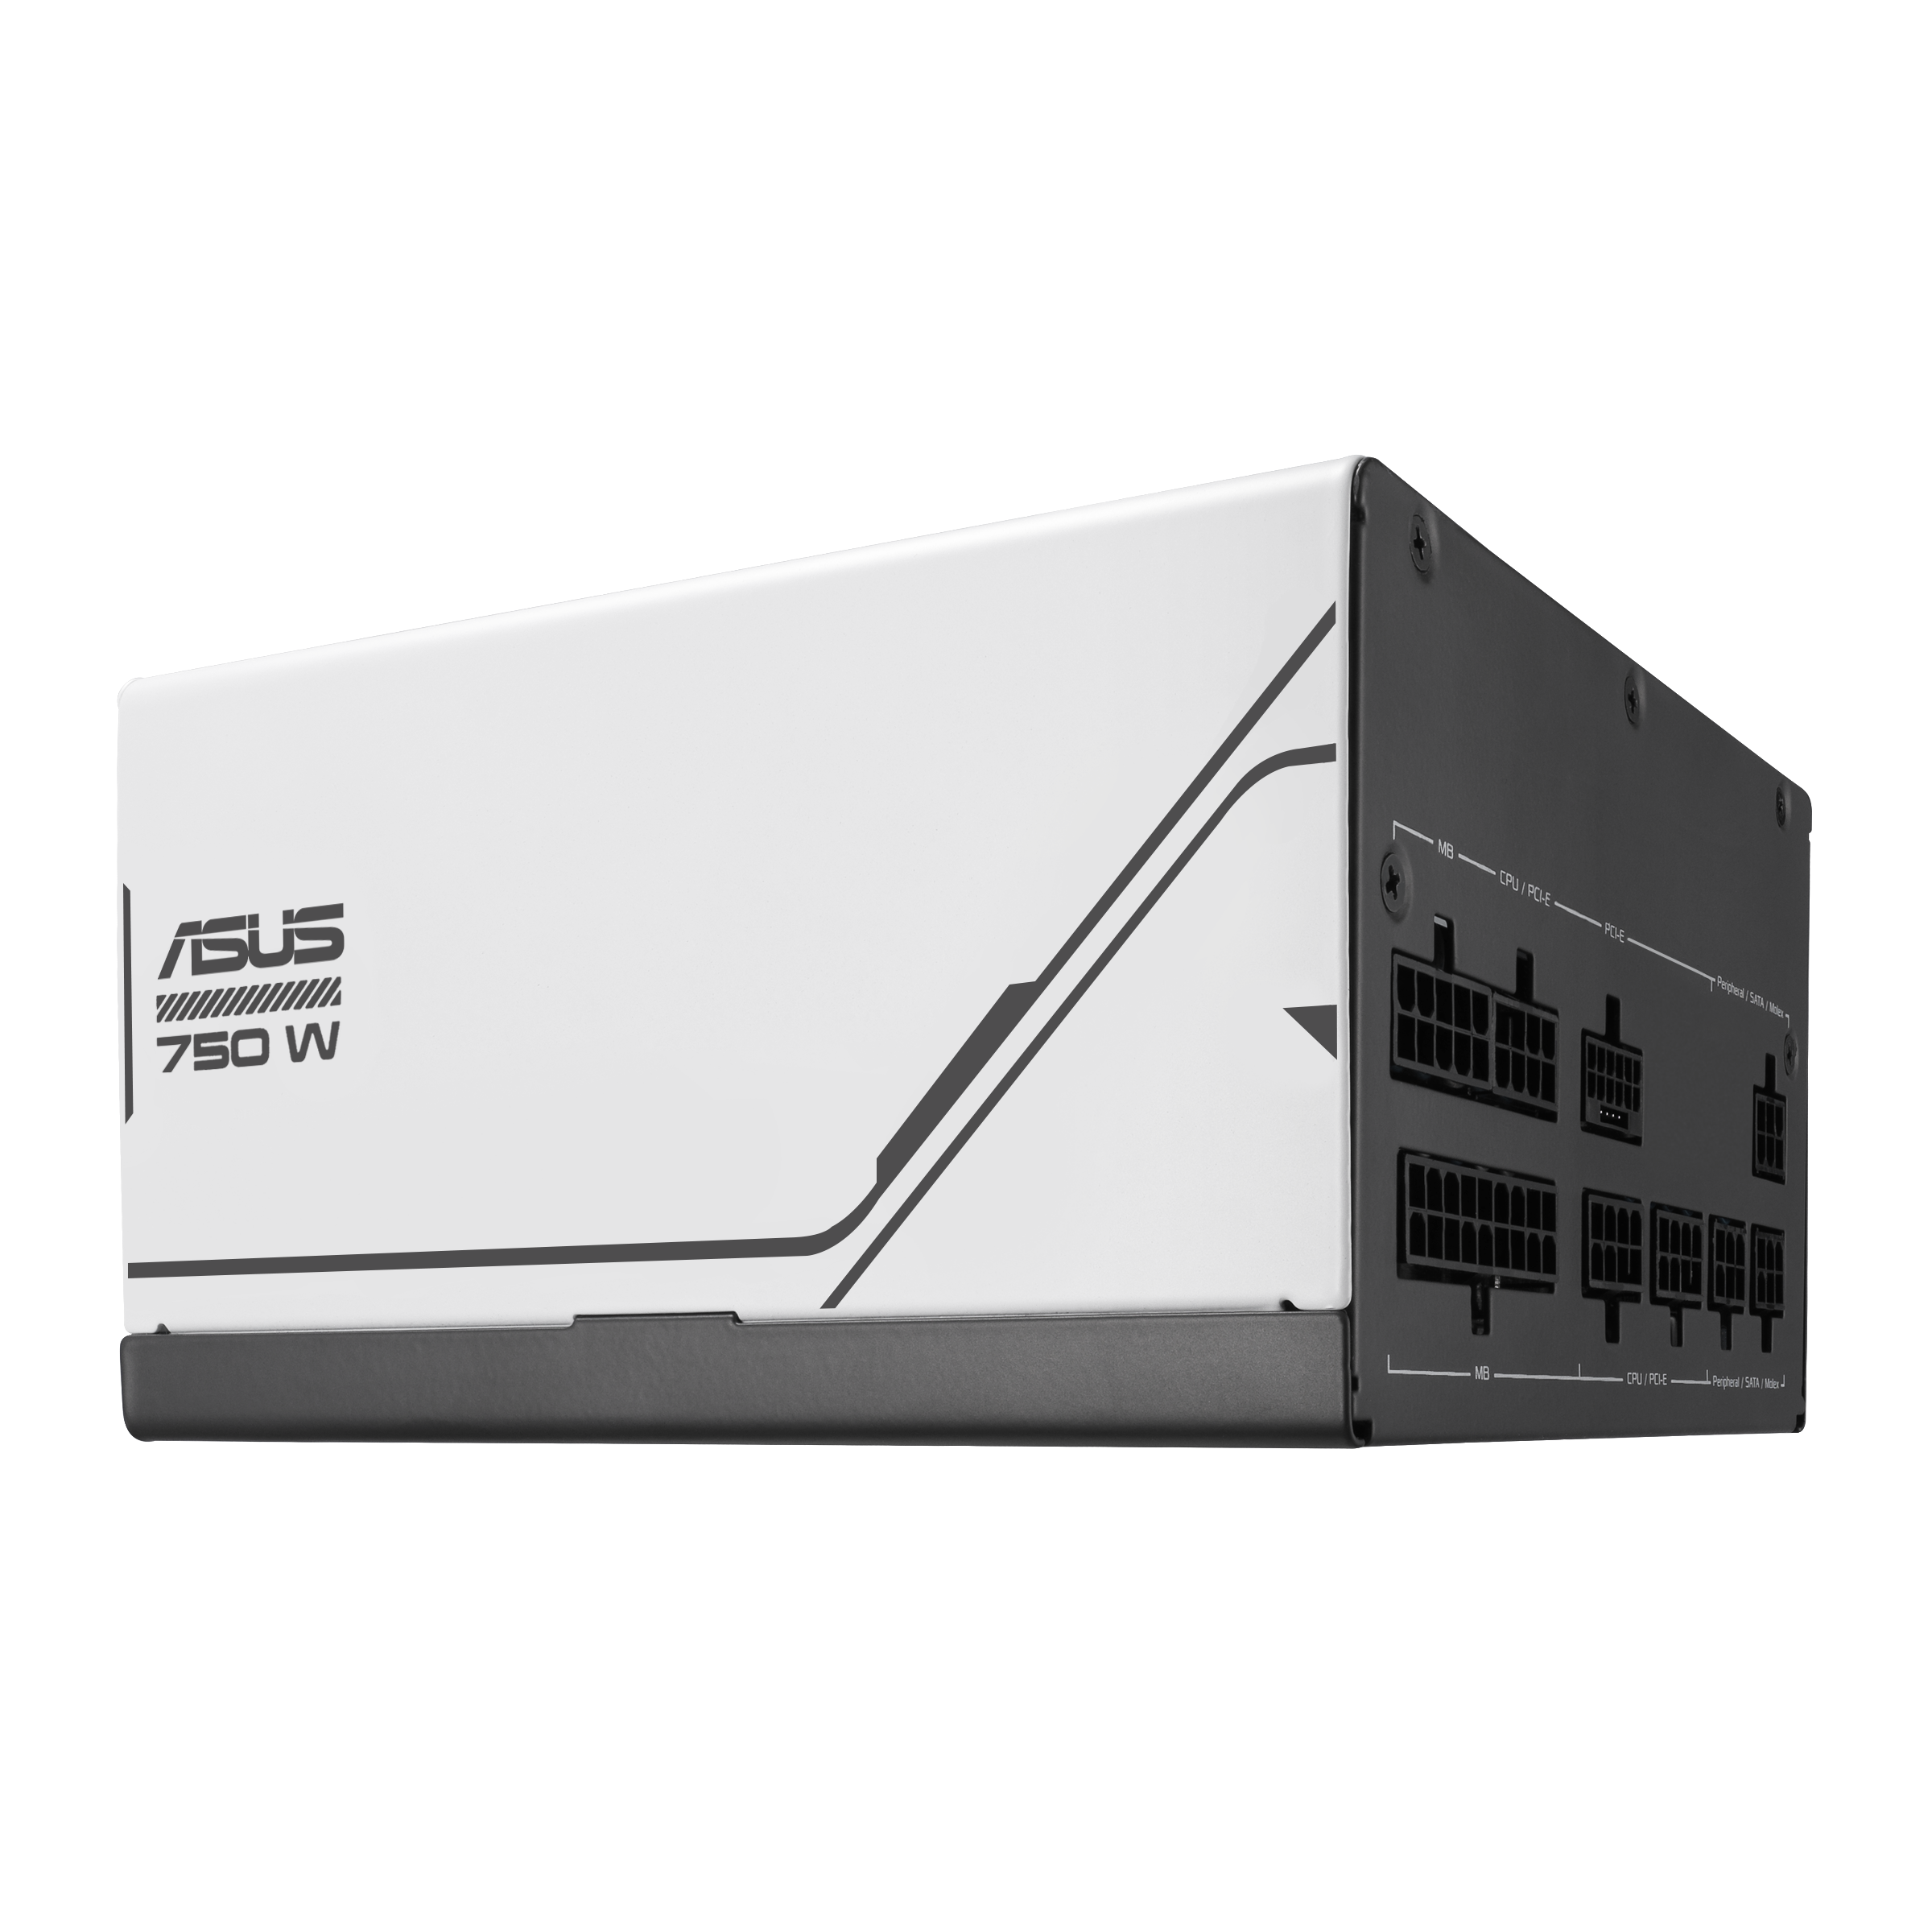 ASUS Prime 750W Gold, Power Supply Units